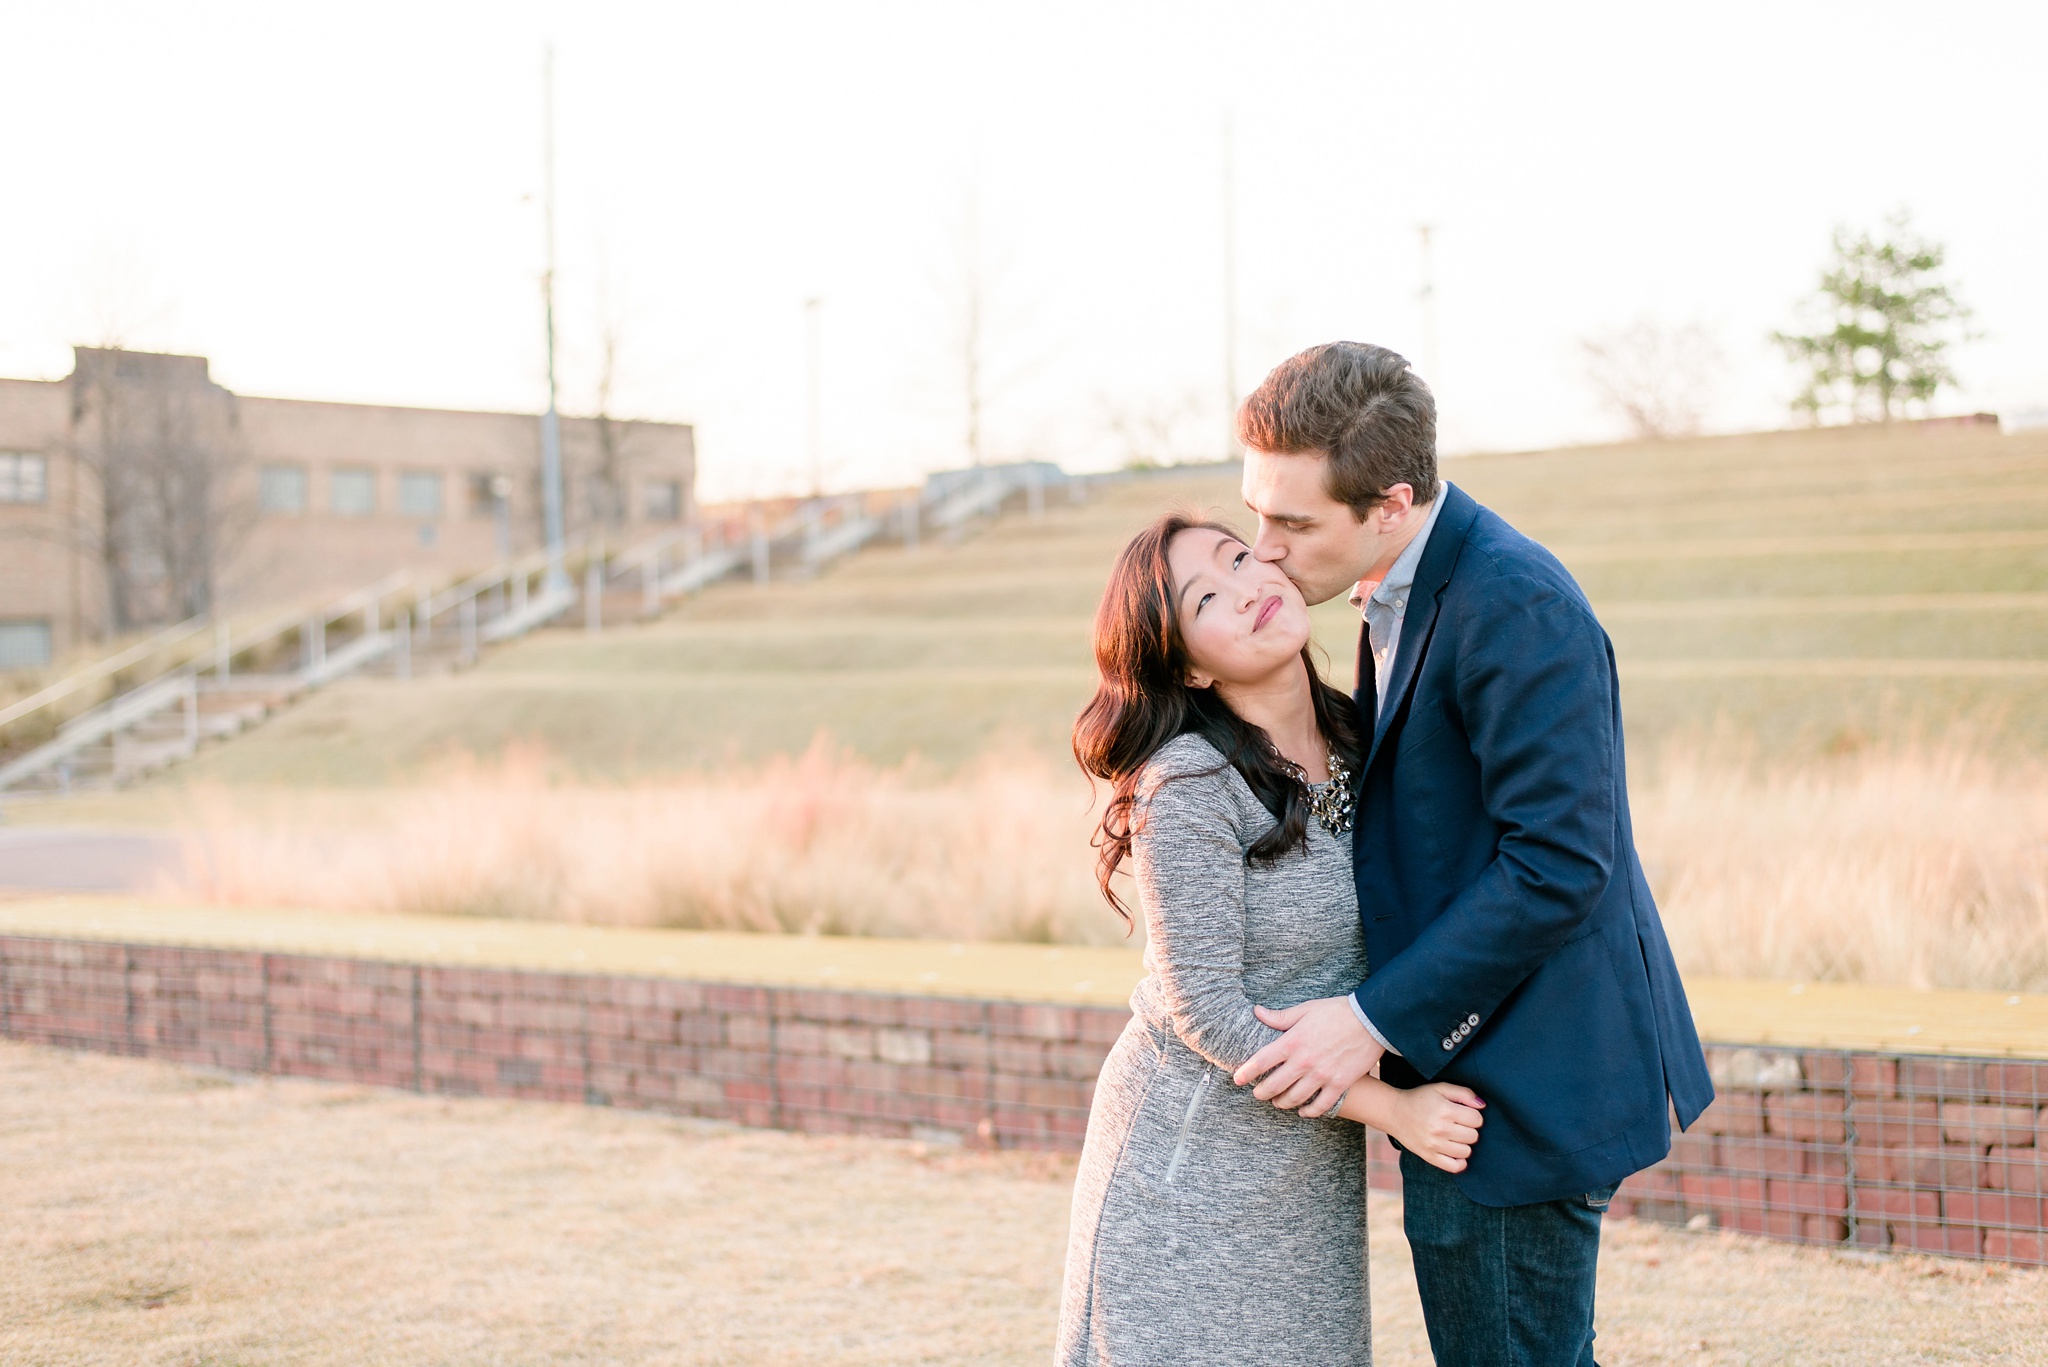 Downtown Nice to Have You in Birmingham Engagement Session| Birmingham Alabama Wedding Photographers_0014.jpg